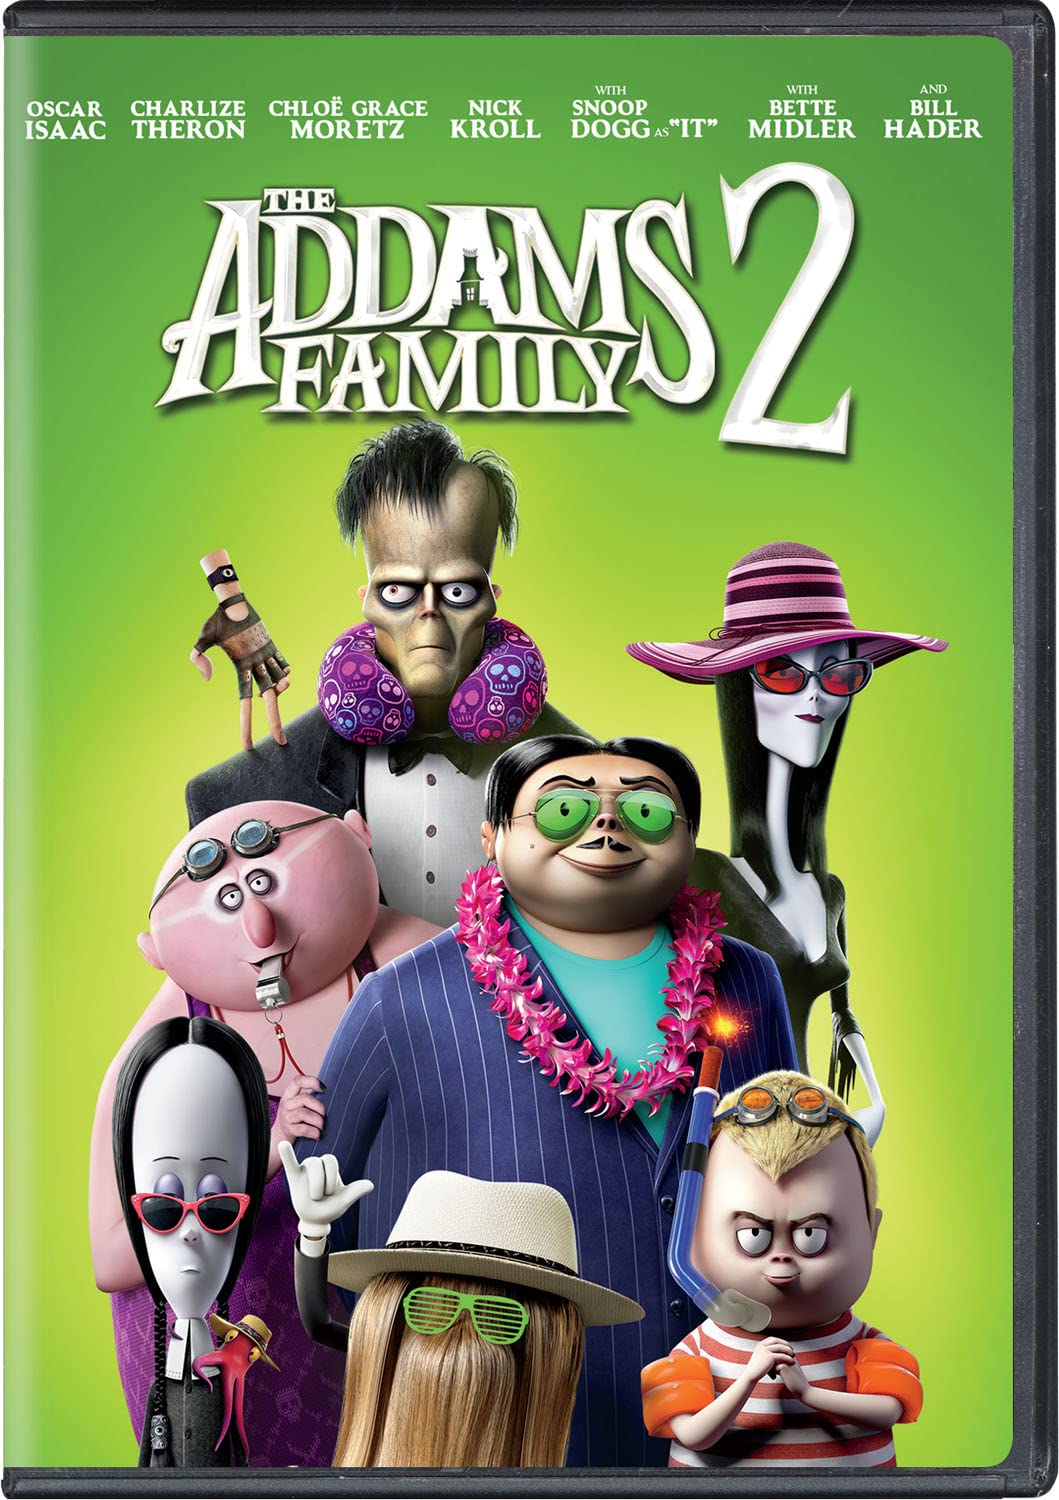 Image for "The Addams Family 2"